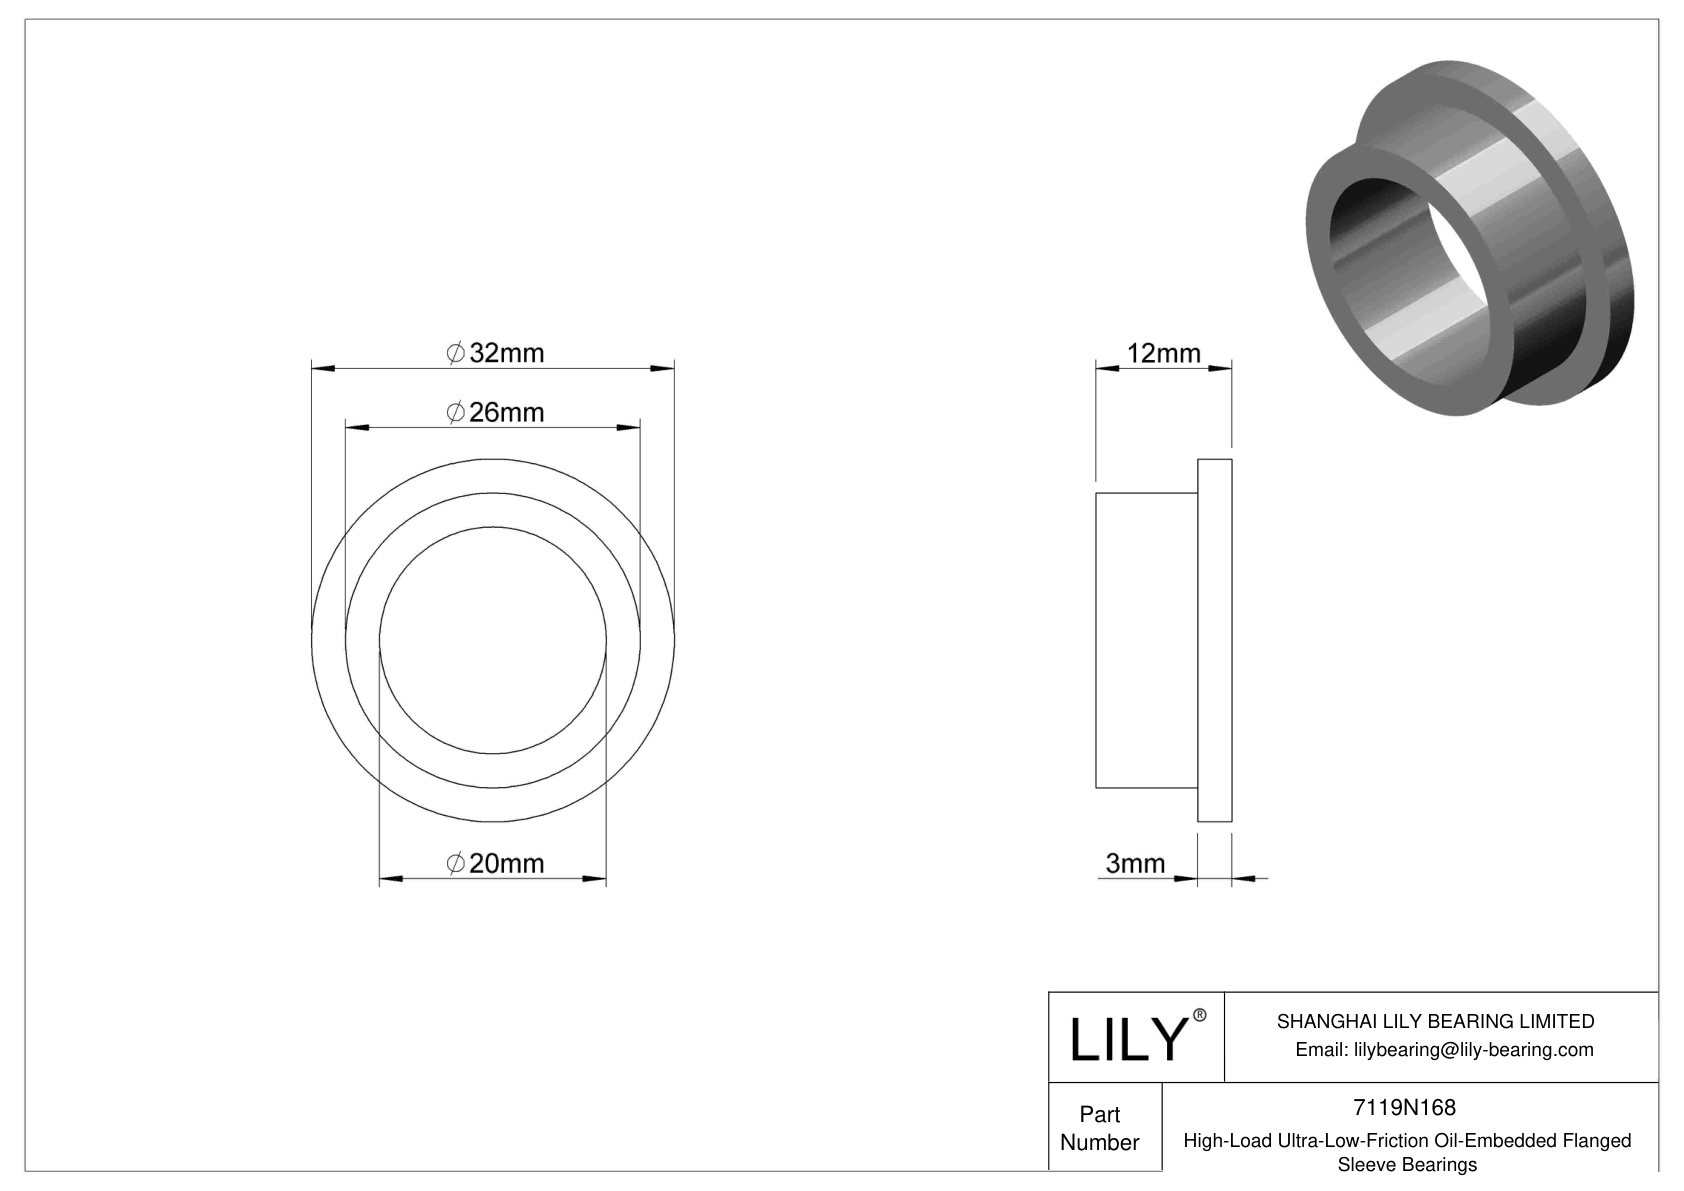 HBBJNBGI High-Load Ultra-Low-Friction Oil-Embedded Flanged Sleeve Bearings cad drawing